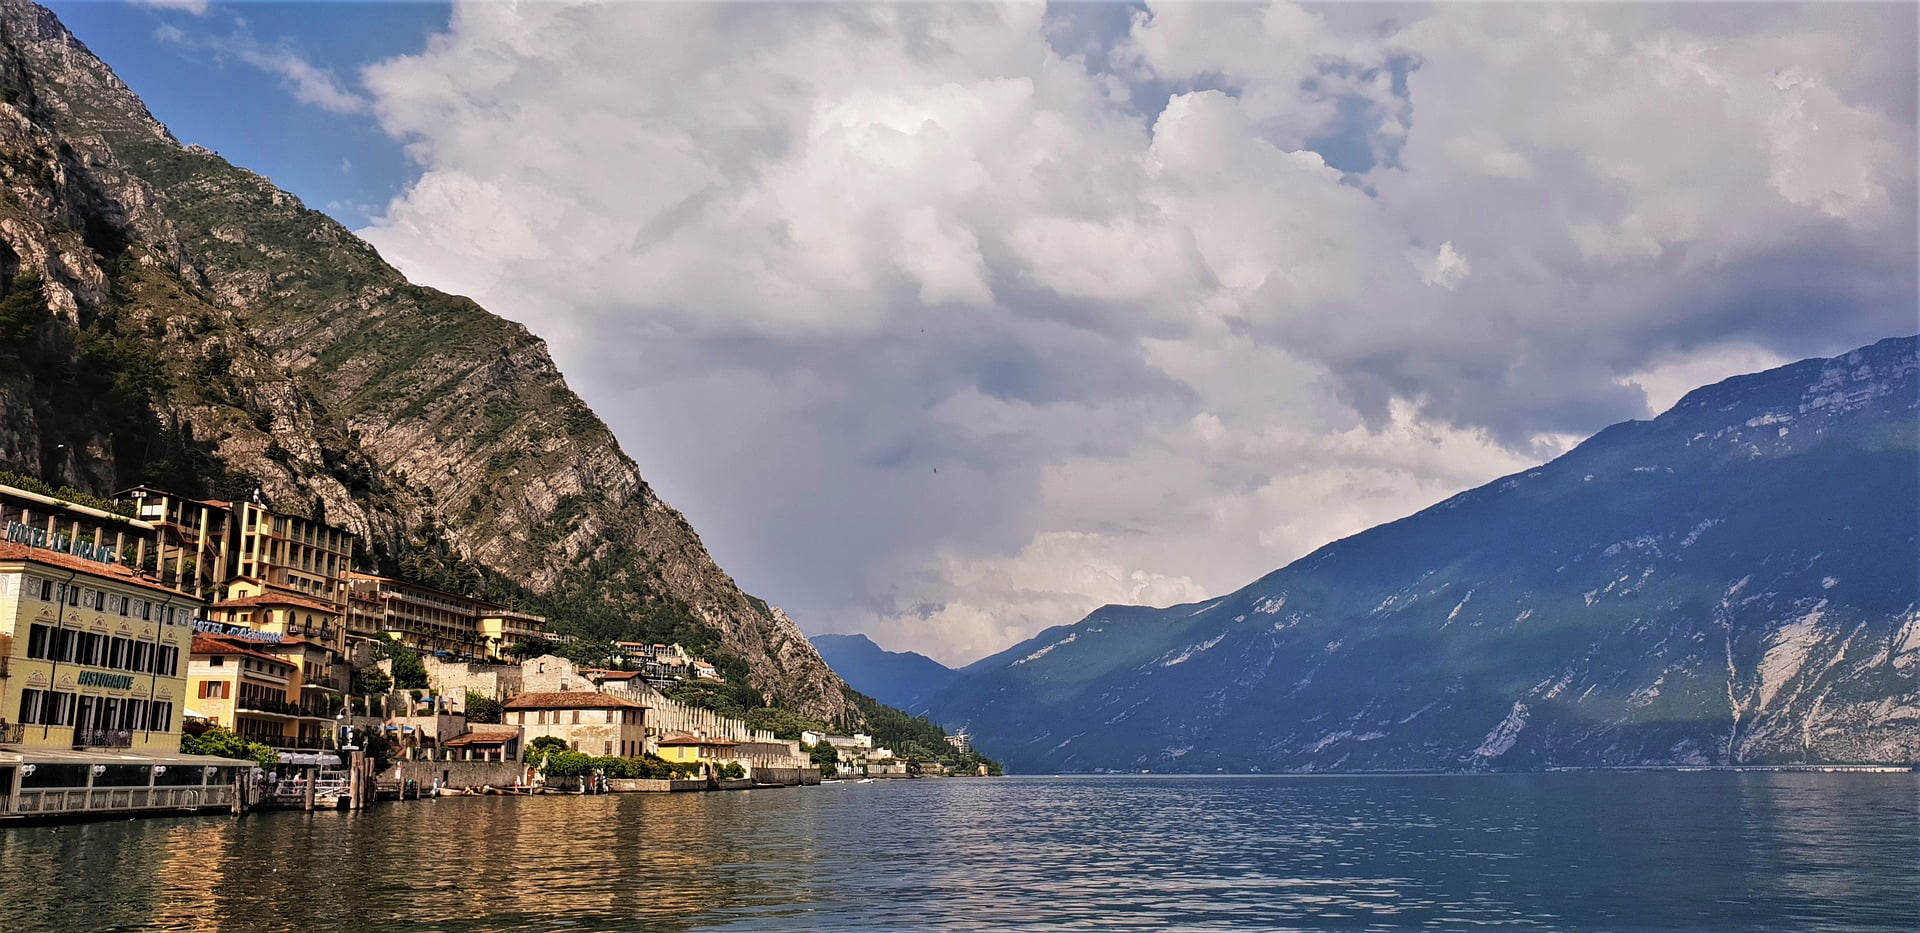 Top 10 things to do in Limone sul Garda- what to do and see